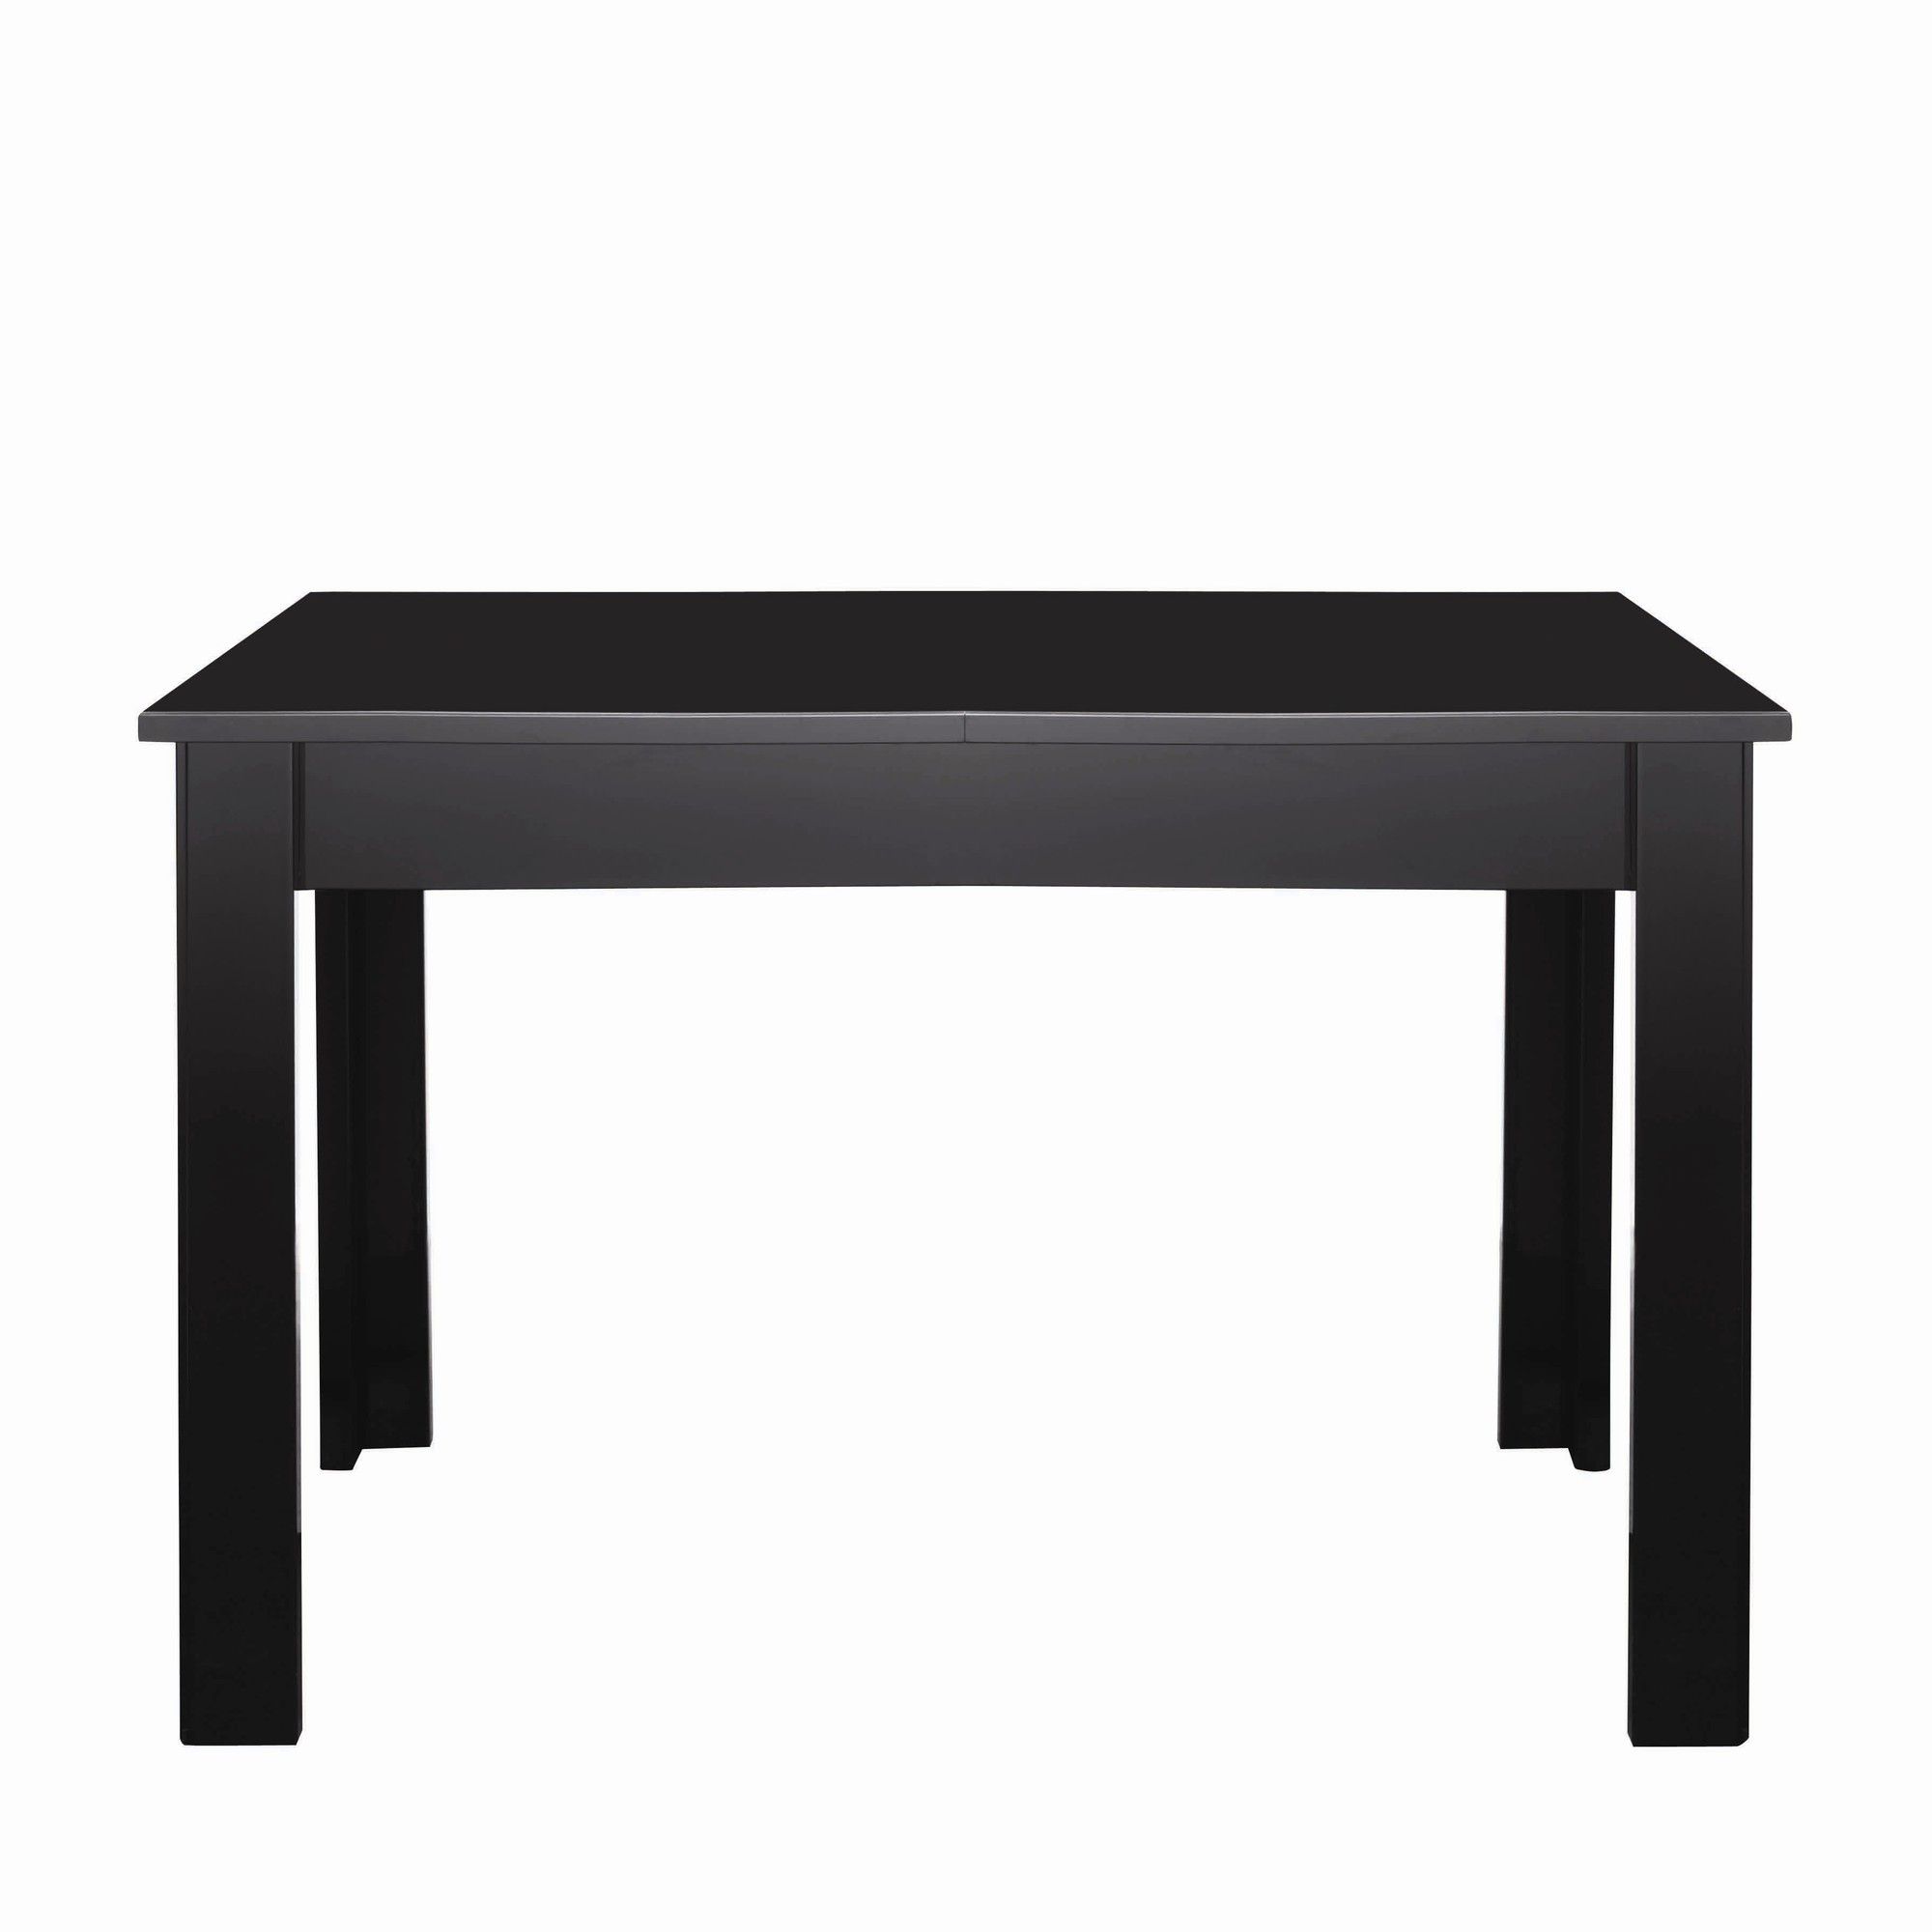 Caxton Manhattan Table with 6 Chairs in Black Gloss at Tesco Direct